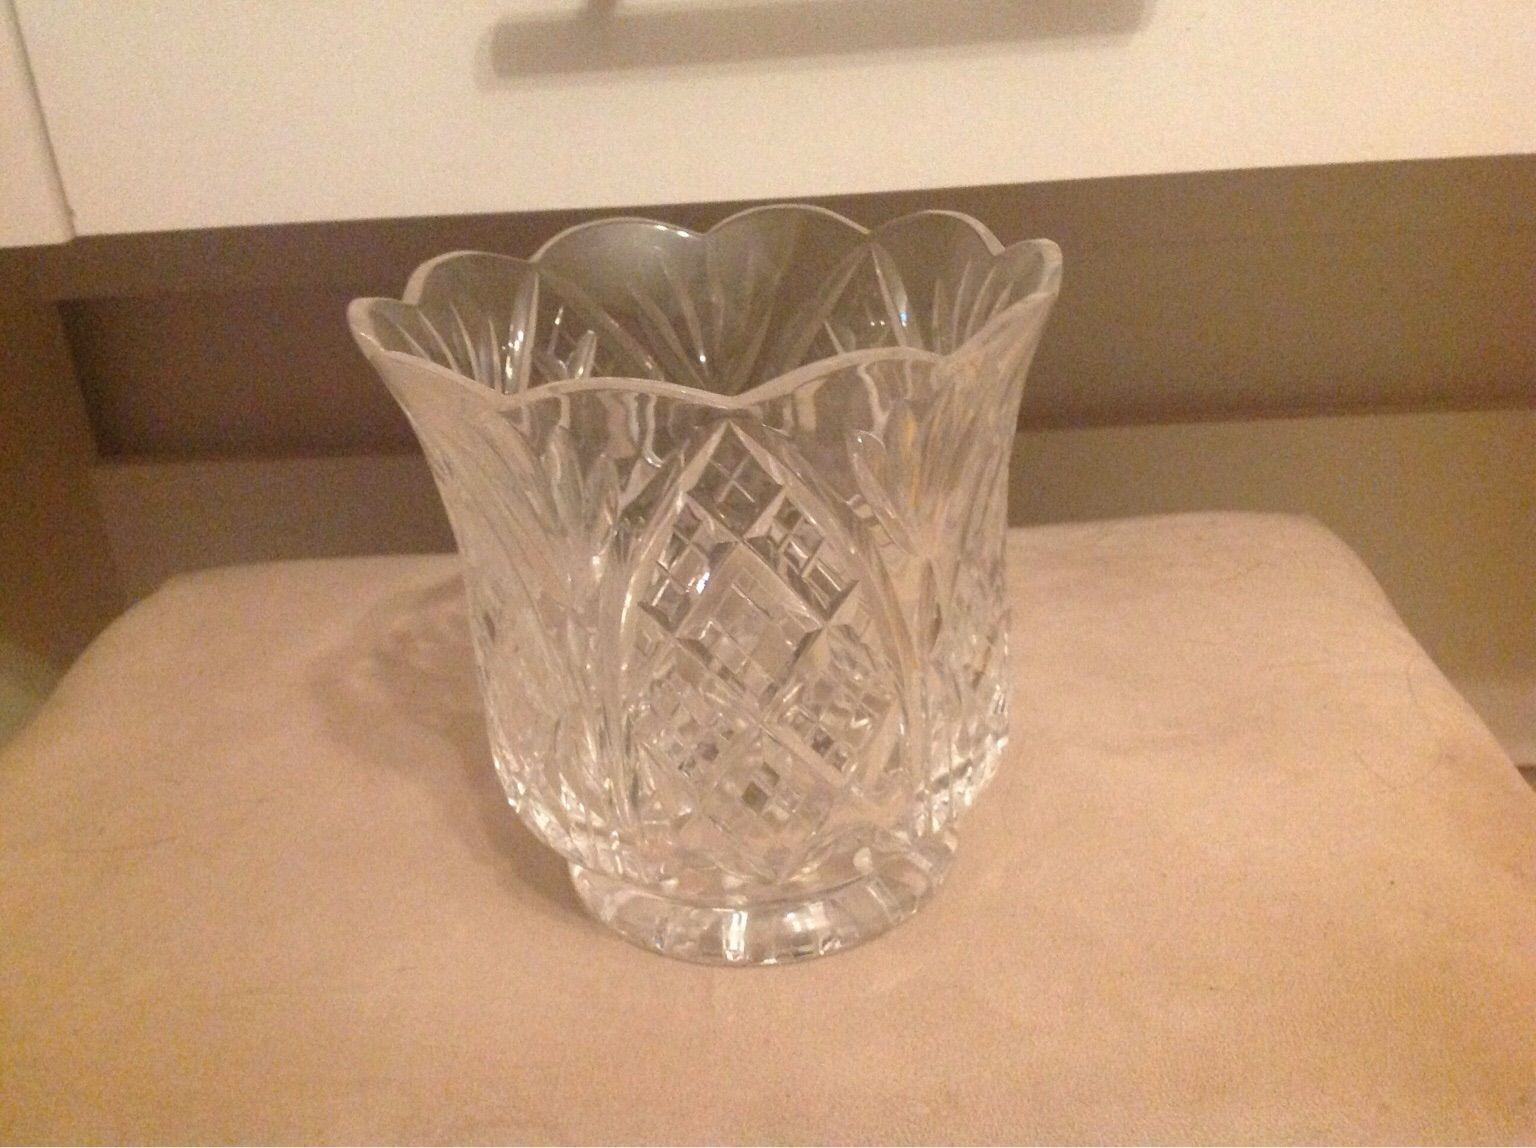 25 Awesome Waterford Marquis Sweet Memories Vase 2024 free download waterford marquis sweet memories vase of https en shpock com i wmucfctt7rd3b1cr 2018 10 10t015529 intended for waterford crystal vase 20af0c92